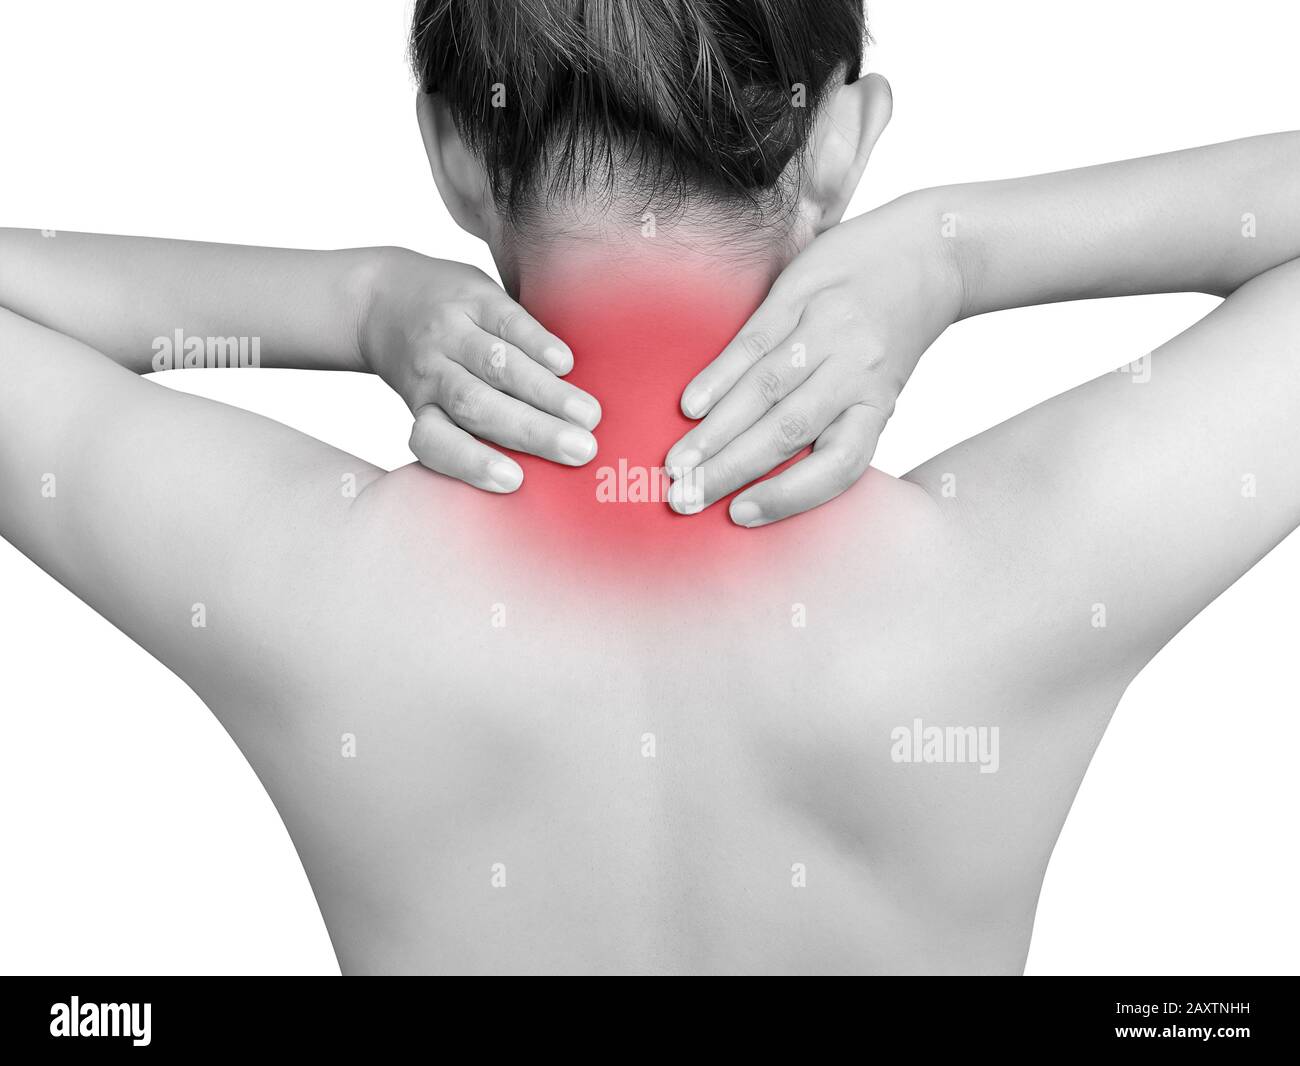 Asian woman suffering from neck pain. mono tone highlight with red color at neck isolated on white background. health care and medical concept Stock Photo